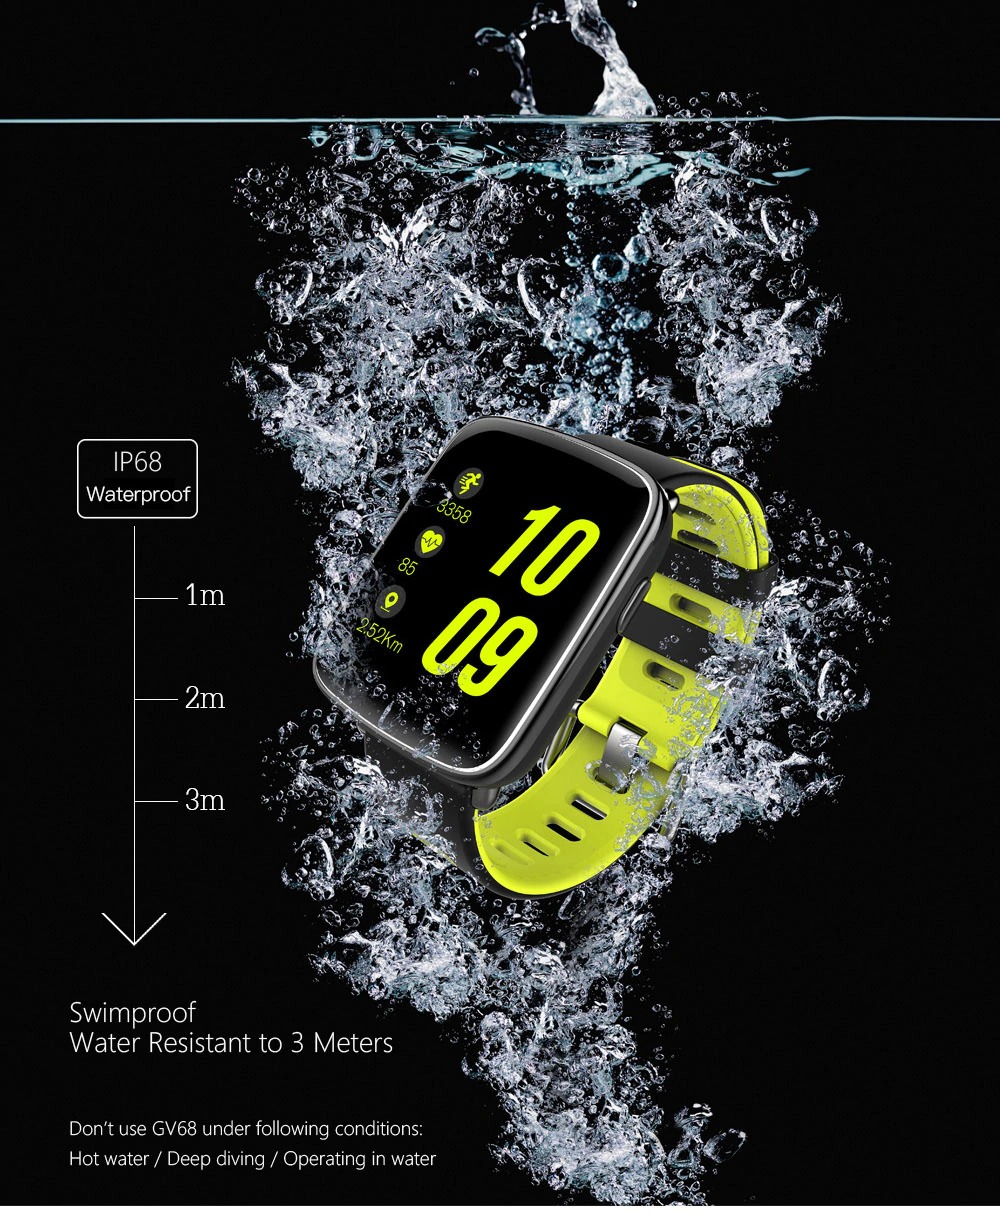 GV68 Smartwatch IP68 Waterproof Bluetooth 4.0 Android iOS Compatible Heart Rate Monitor Remote Camera Pedometer - Black green